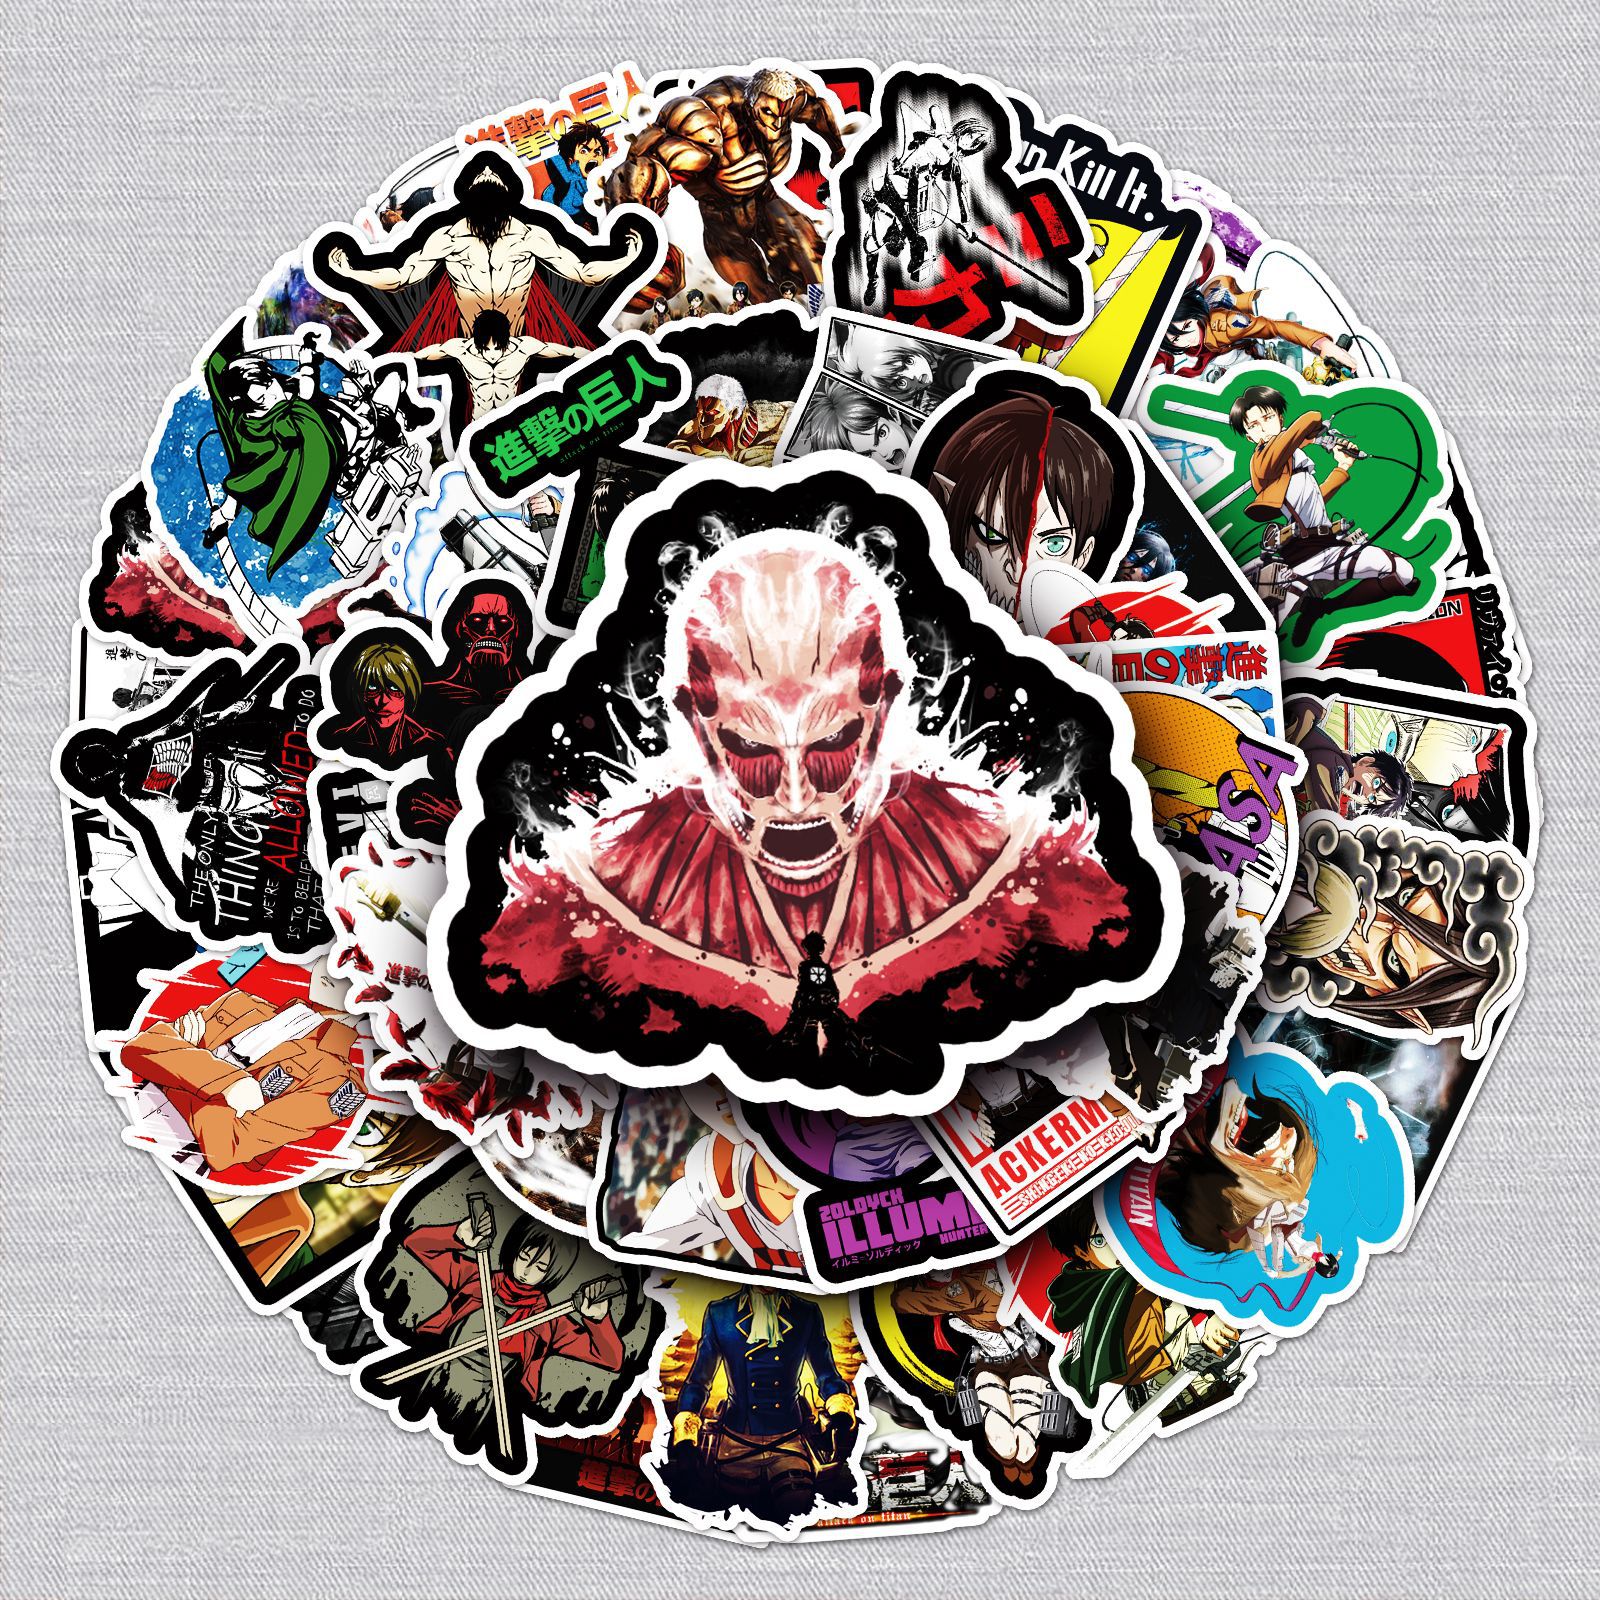 Attack on Titan anime waterproof stickers (50pcs a set)